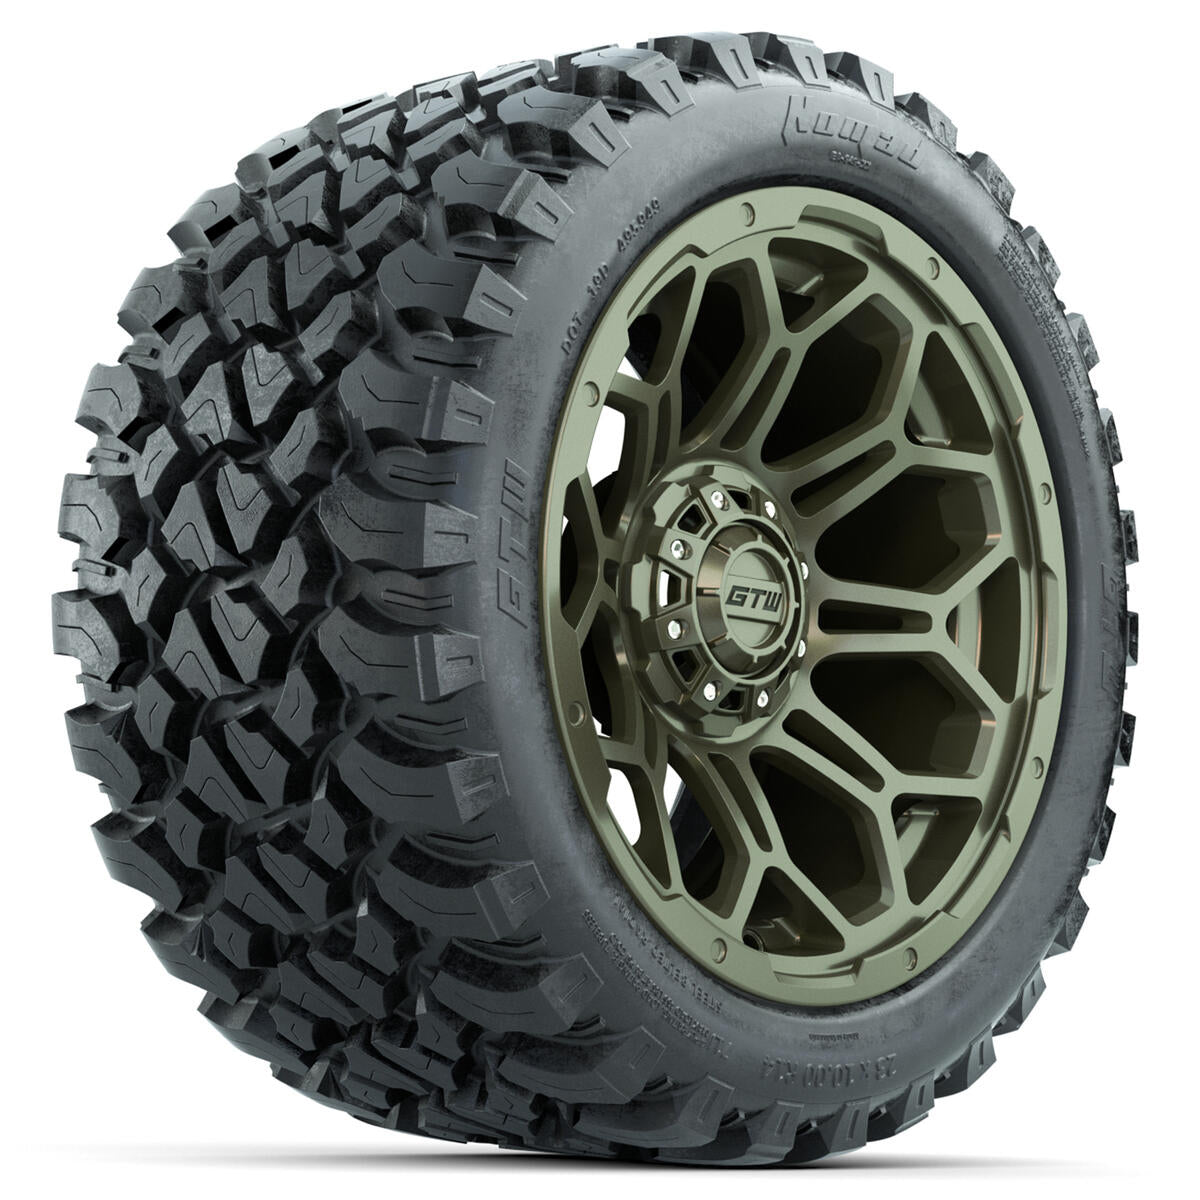 Set of 4 14"in GTW Bravo Wheels with 23x10-14"GTW Nomad All-Terrain Tires A19-696